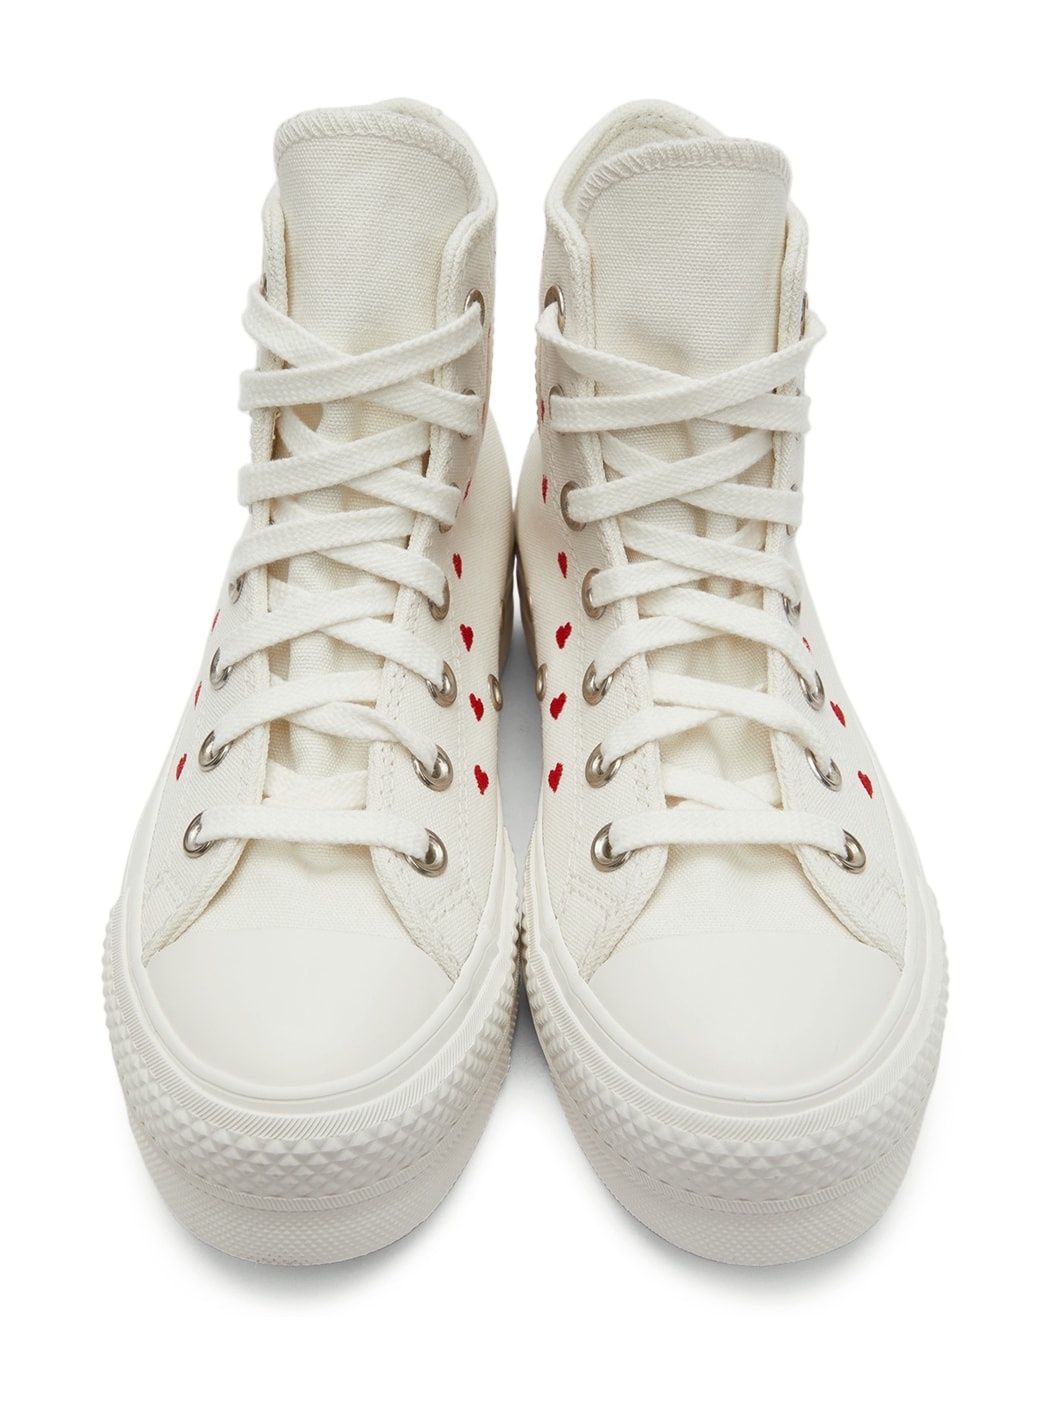 White Chuck Taylor All Star Lift High Top Sneakers - 5